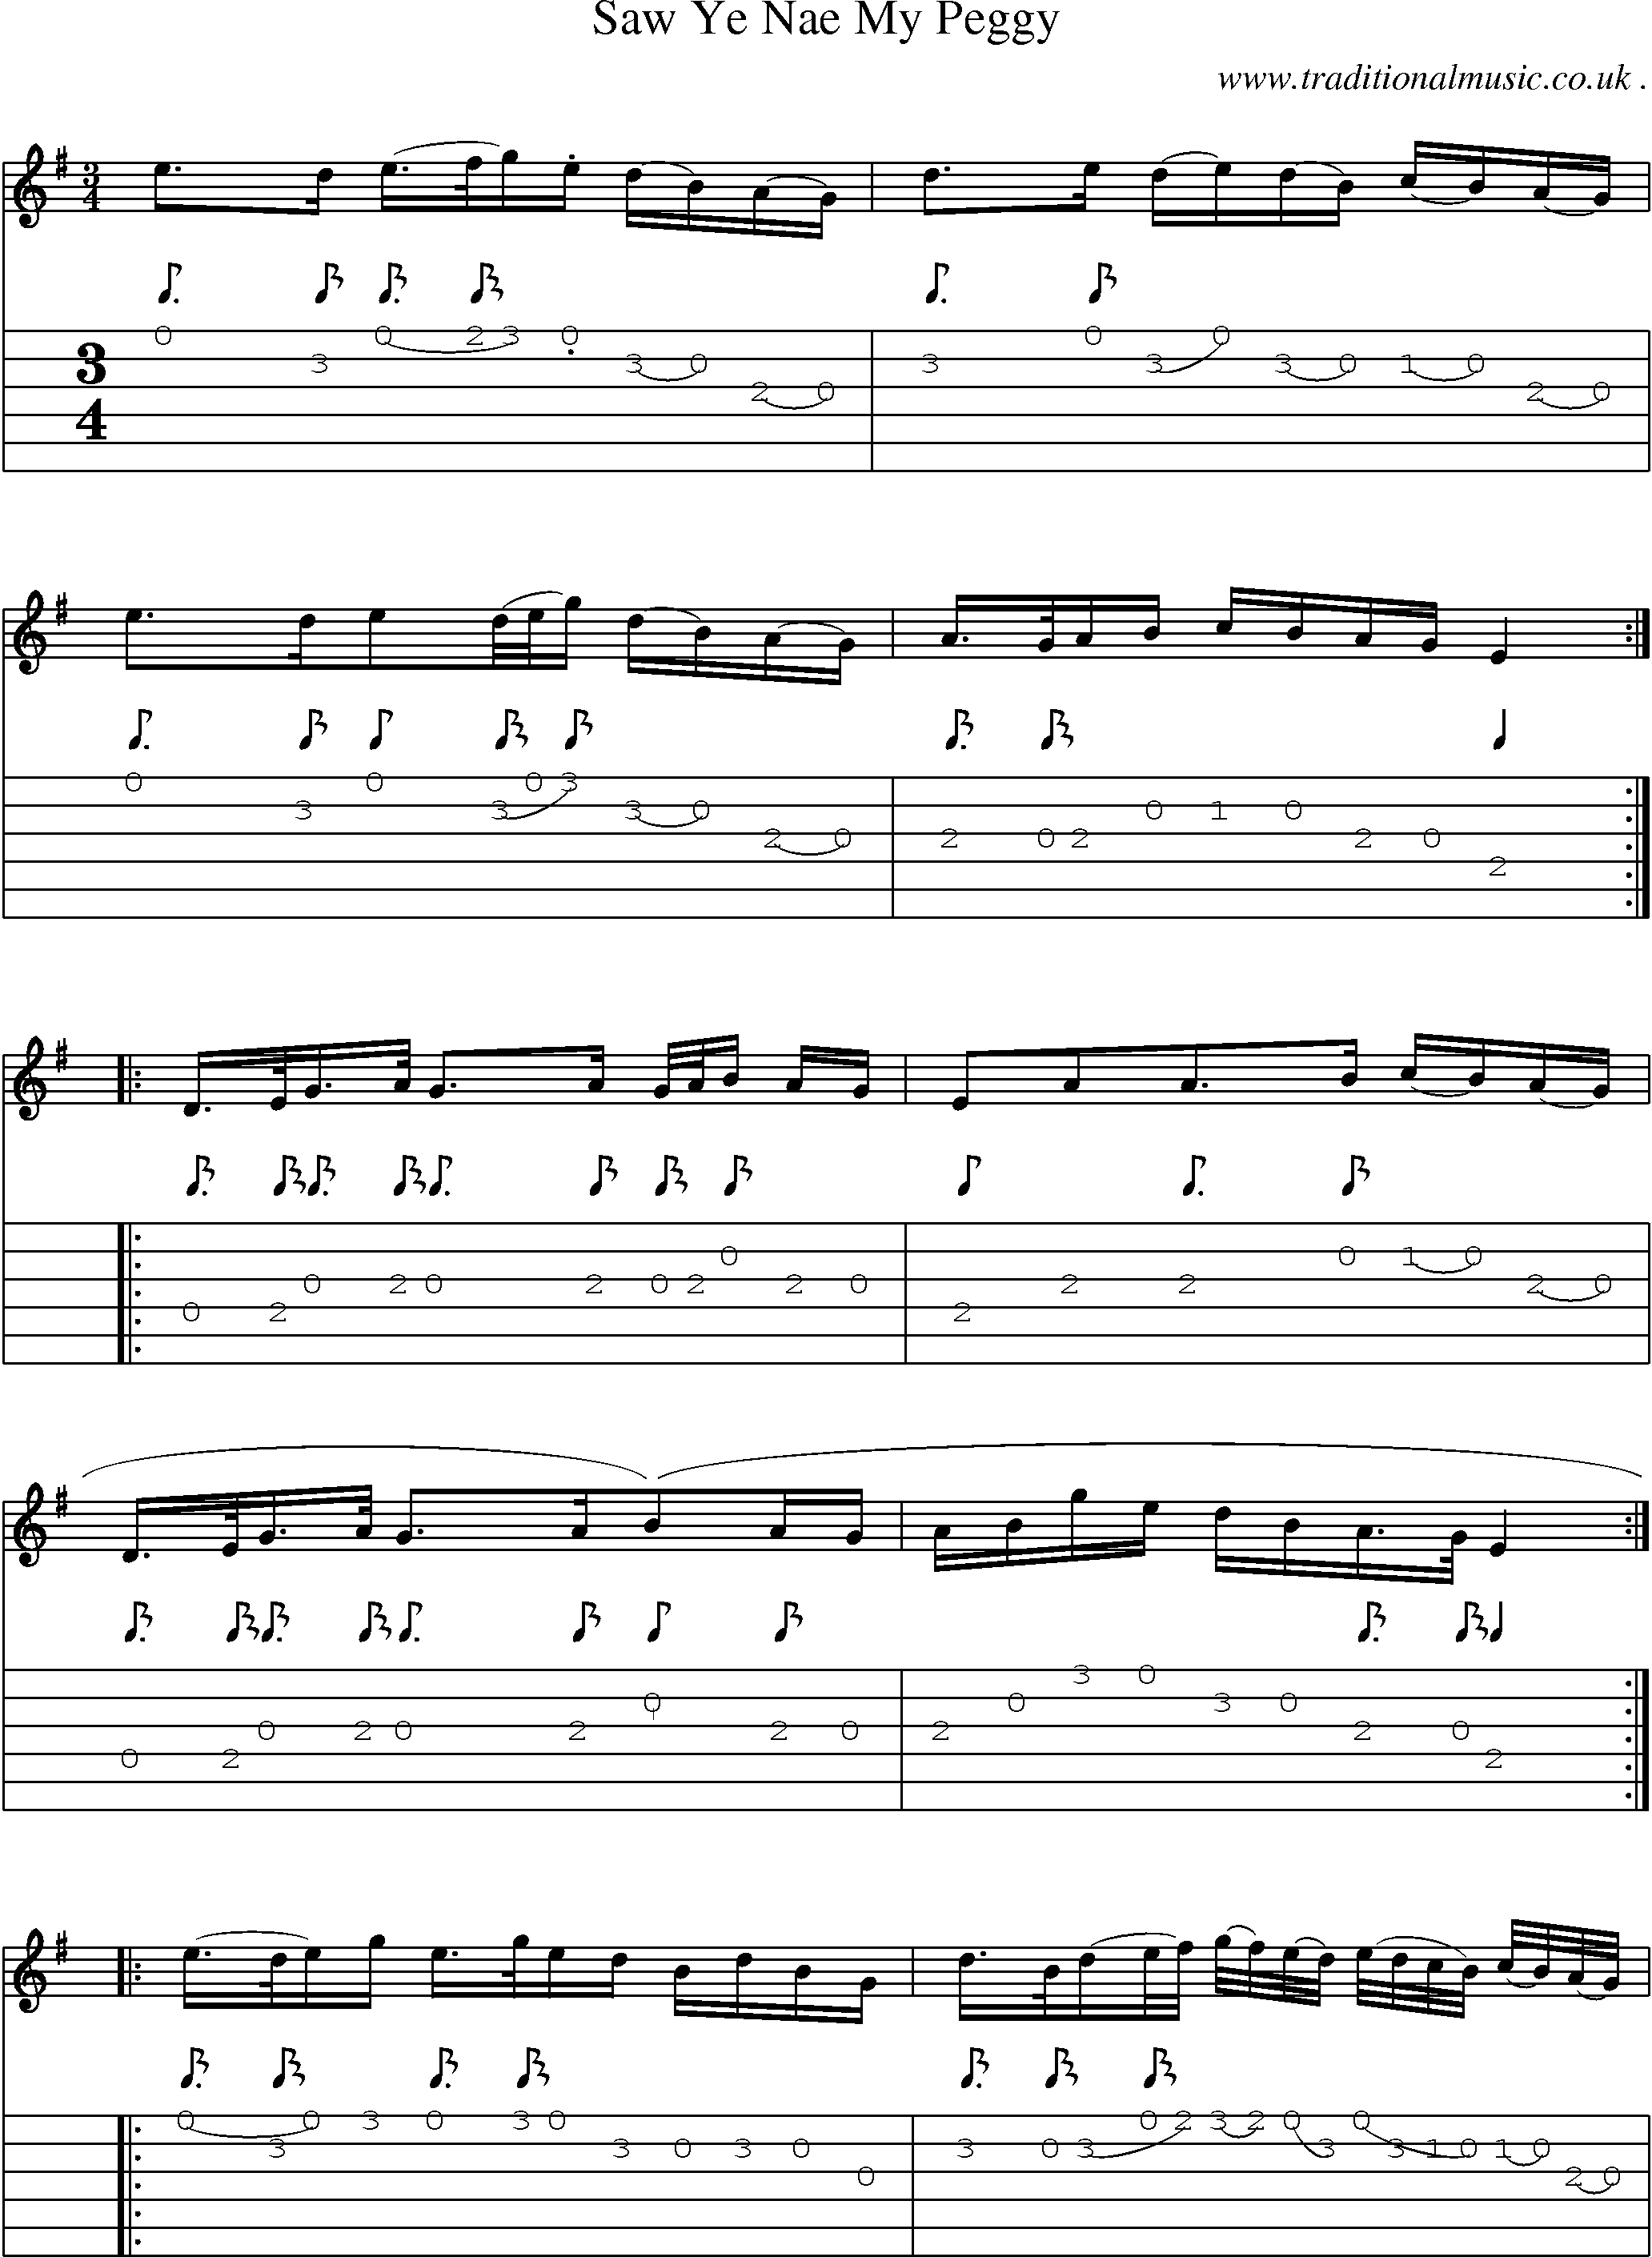 Sheet-Music and Guitar Tabs for Saw Ye Nae My Peggy